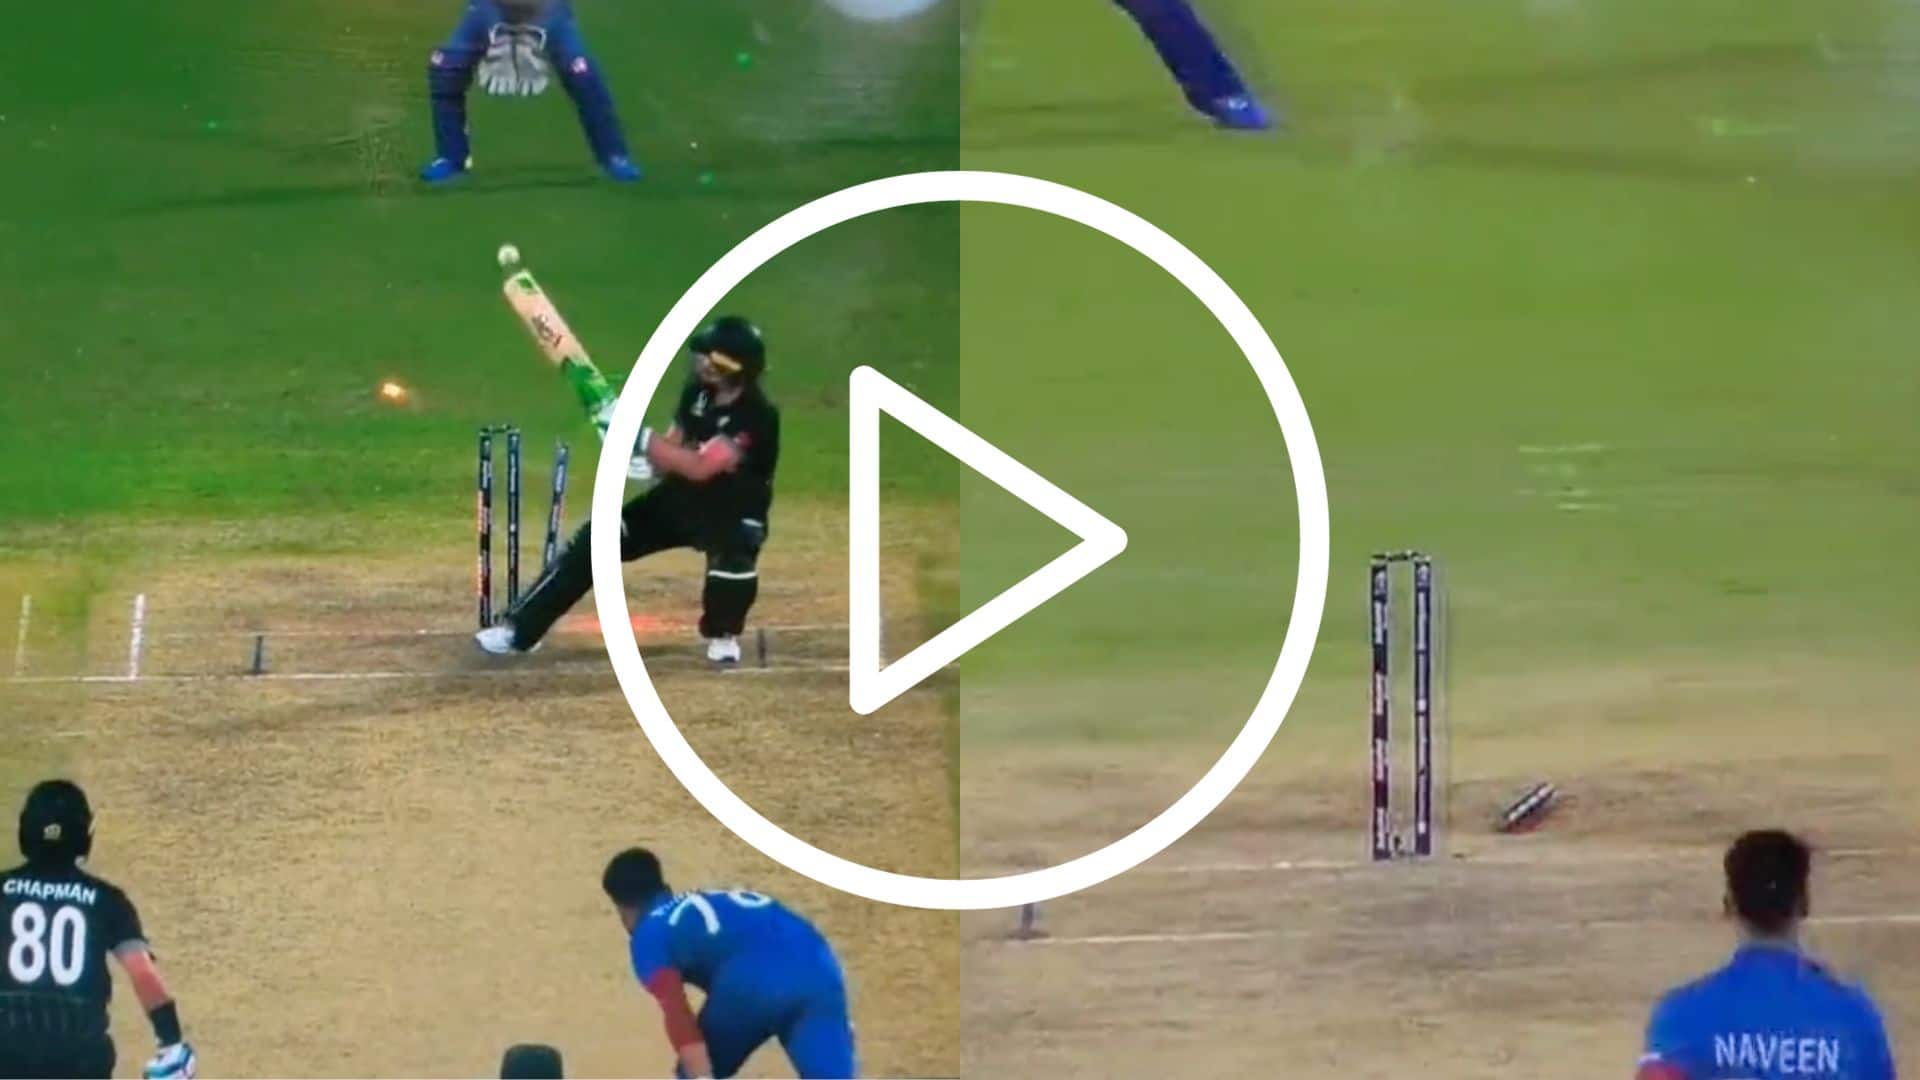 [Watch] Naveen-ul-Haq ‘Rips Through’ Tom Latham With A Cracker Of A Delivery